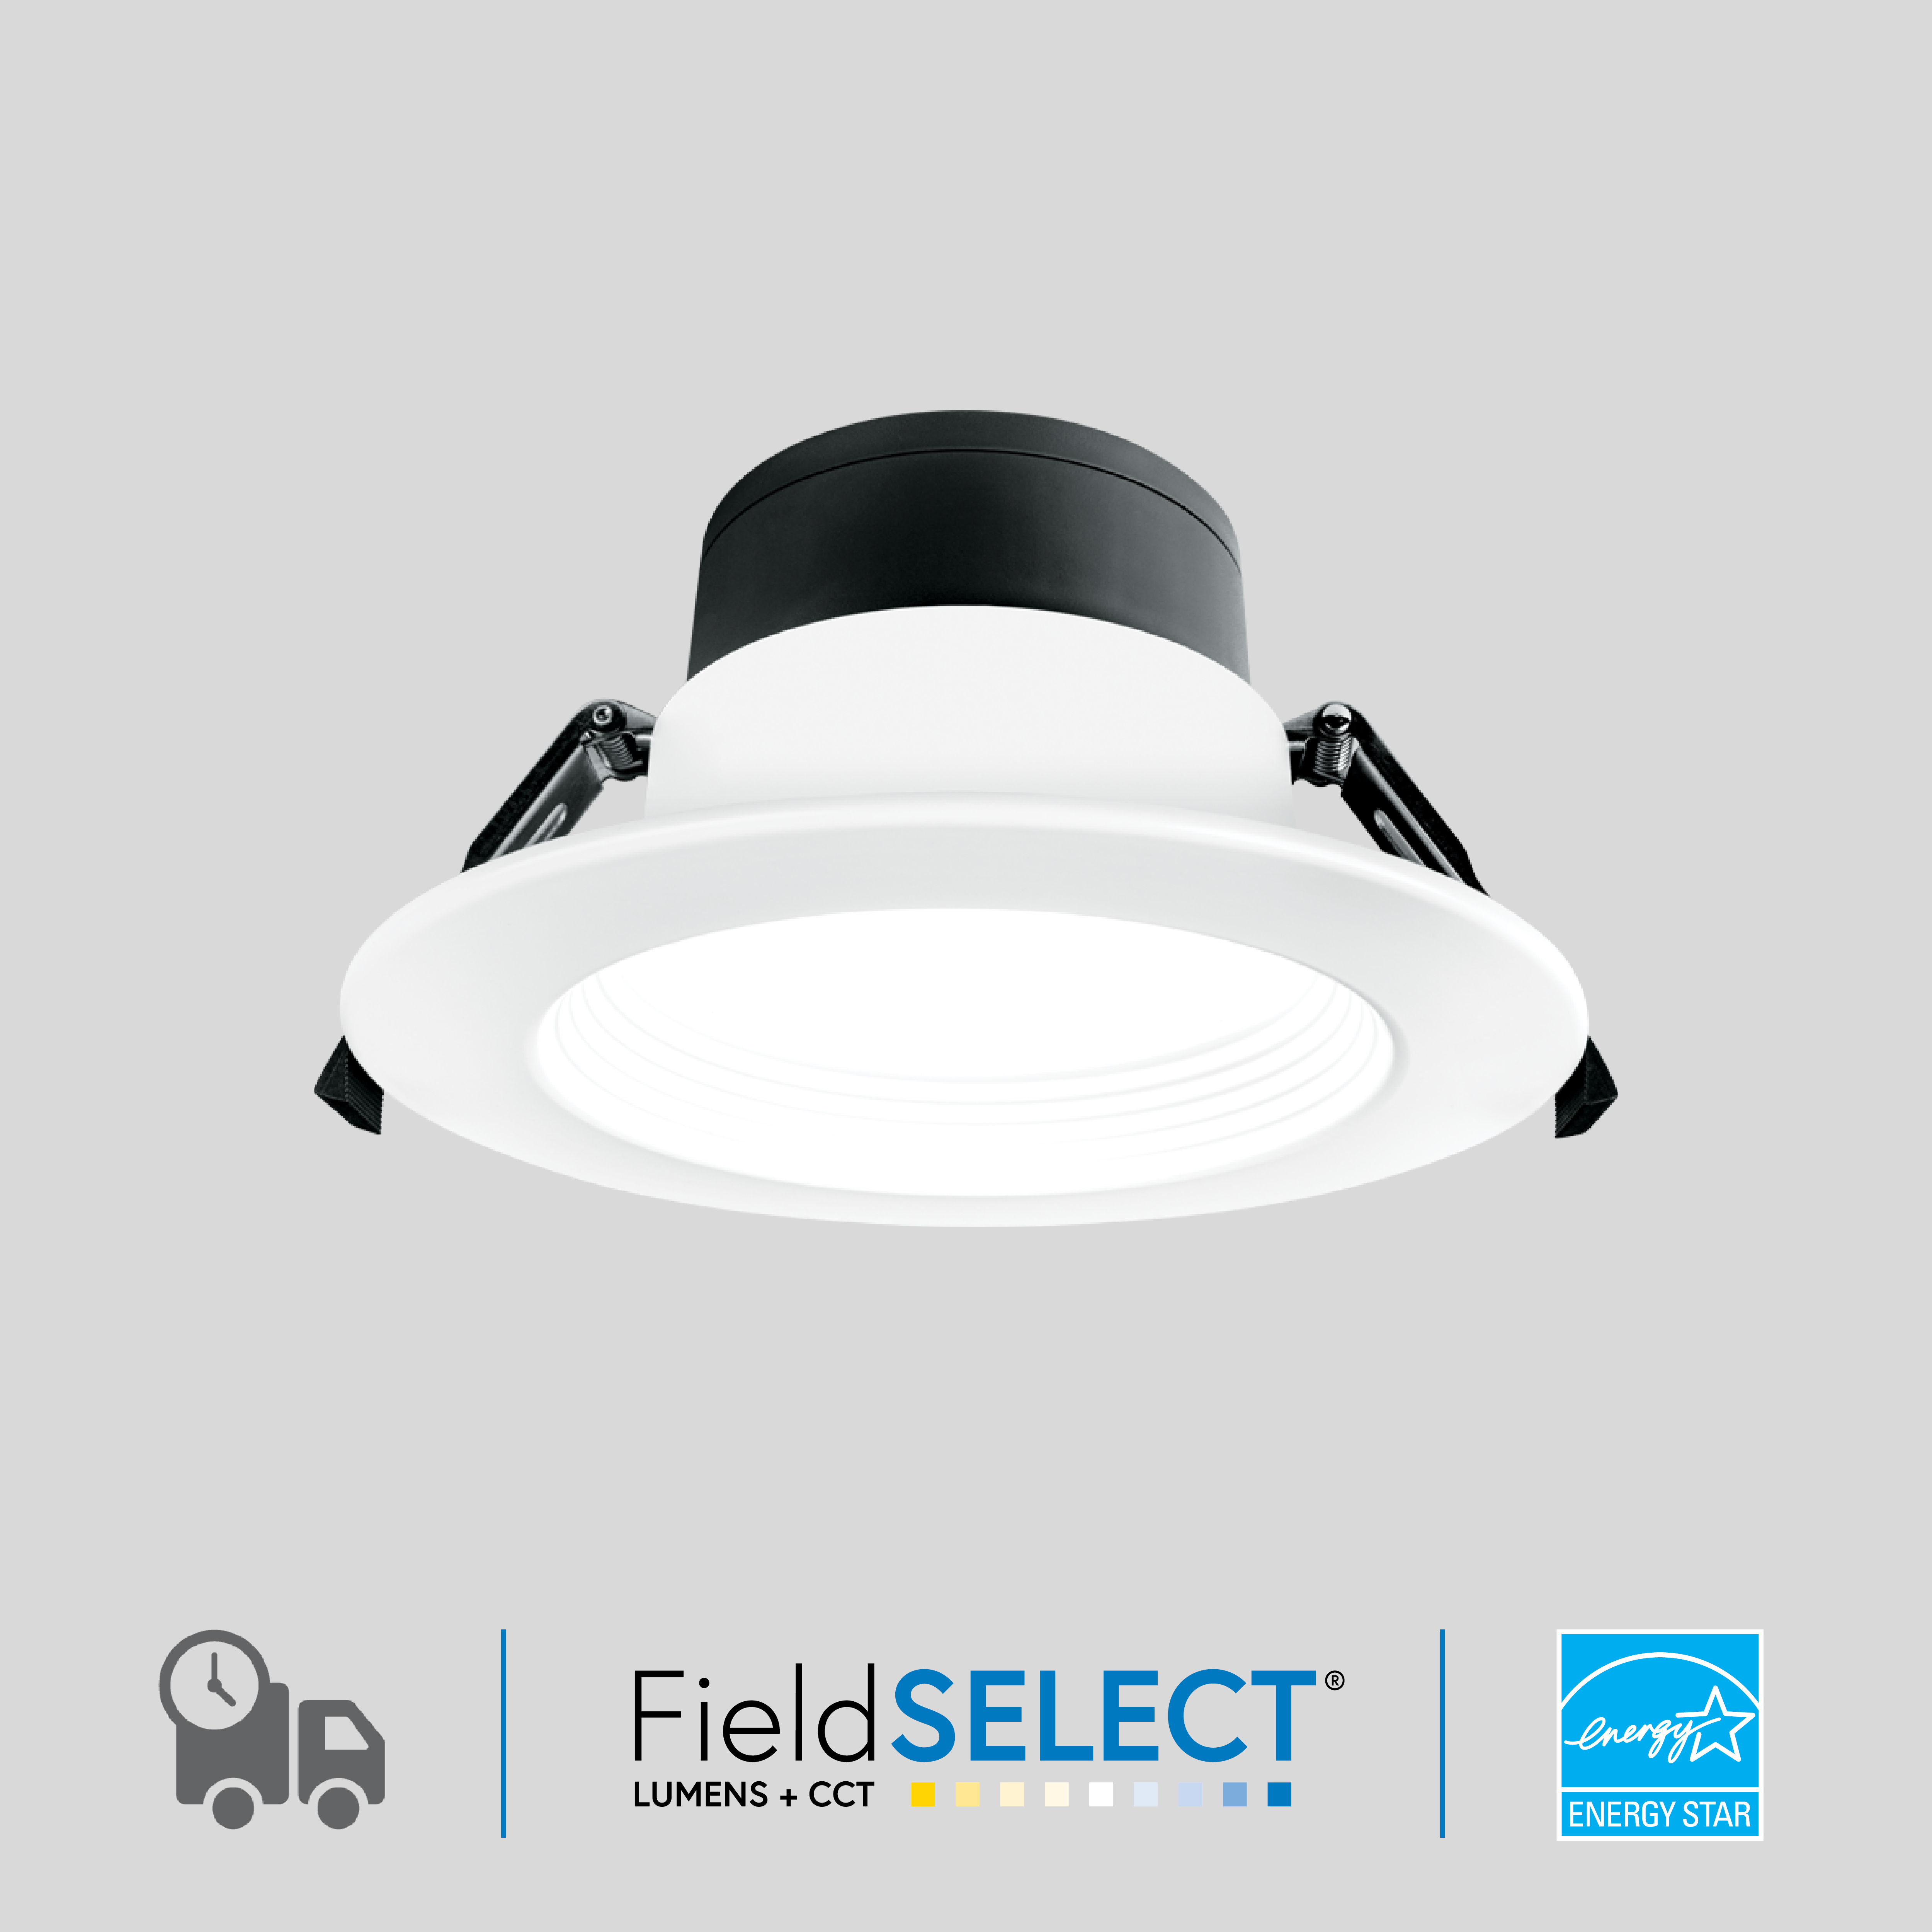 NEW! 6RCD FieldSELECT Downlight. In stock and ready to ship!